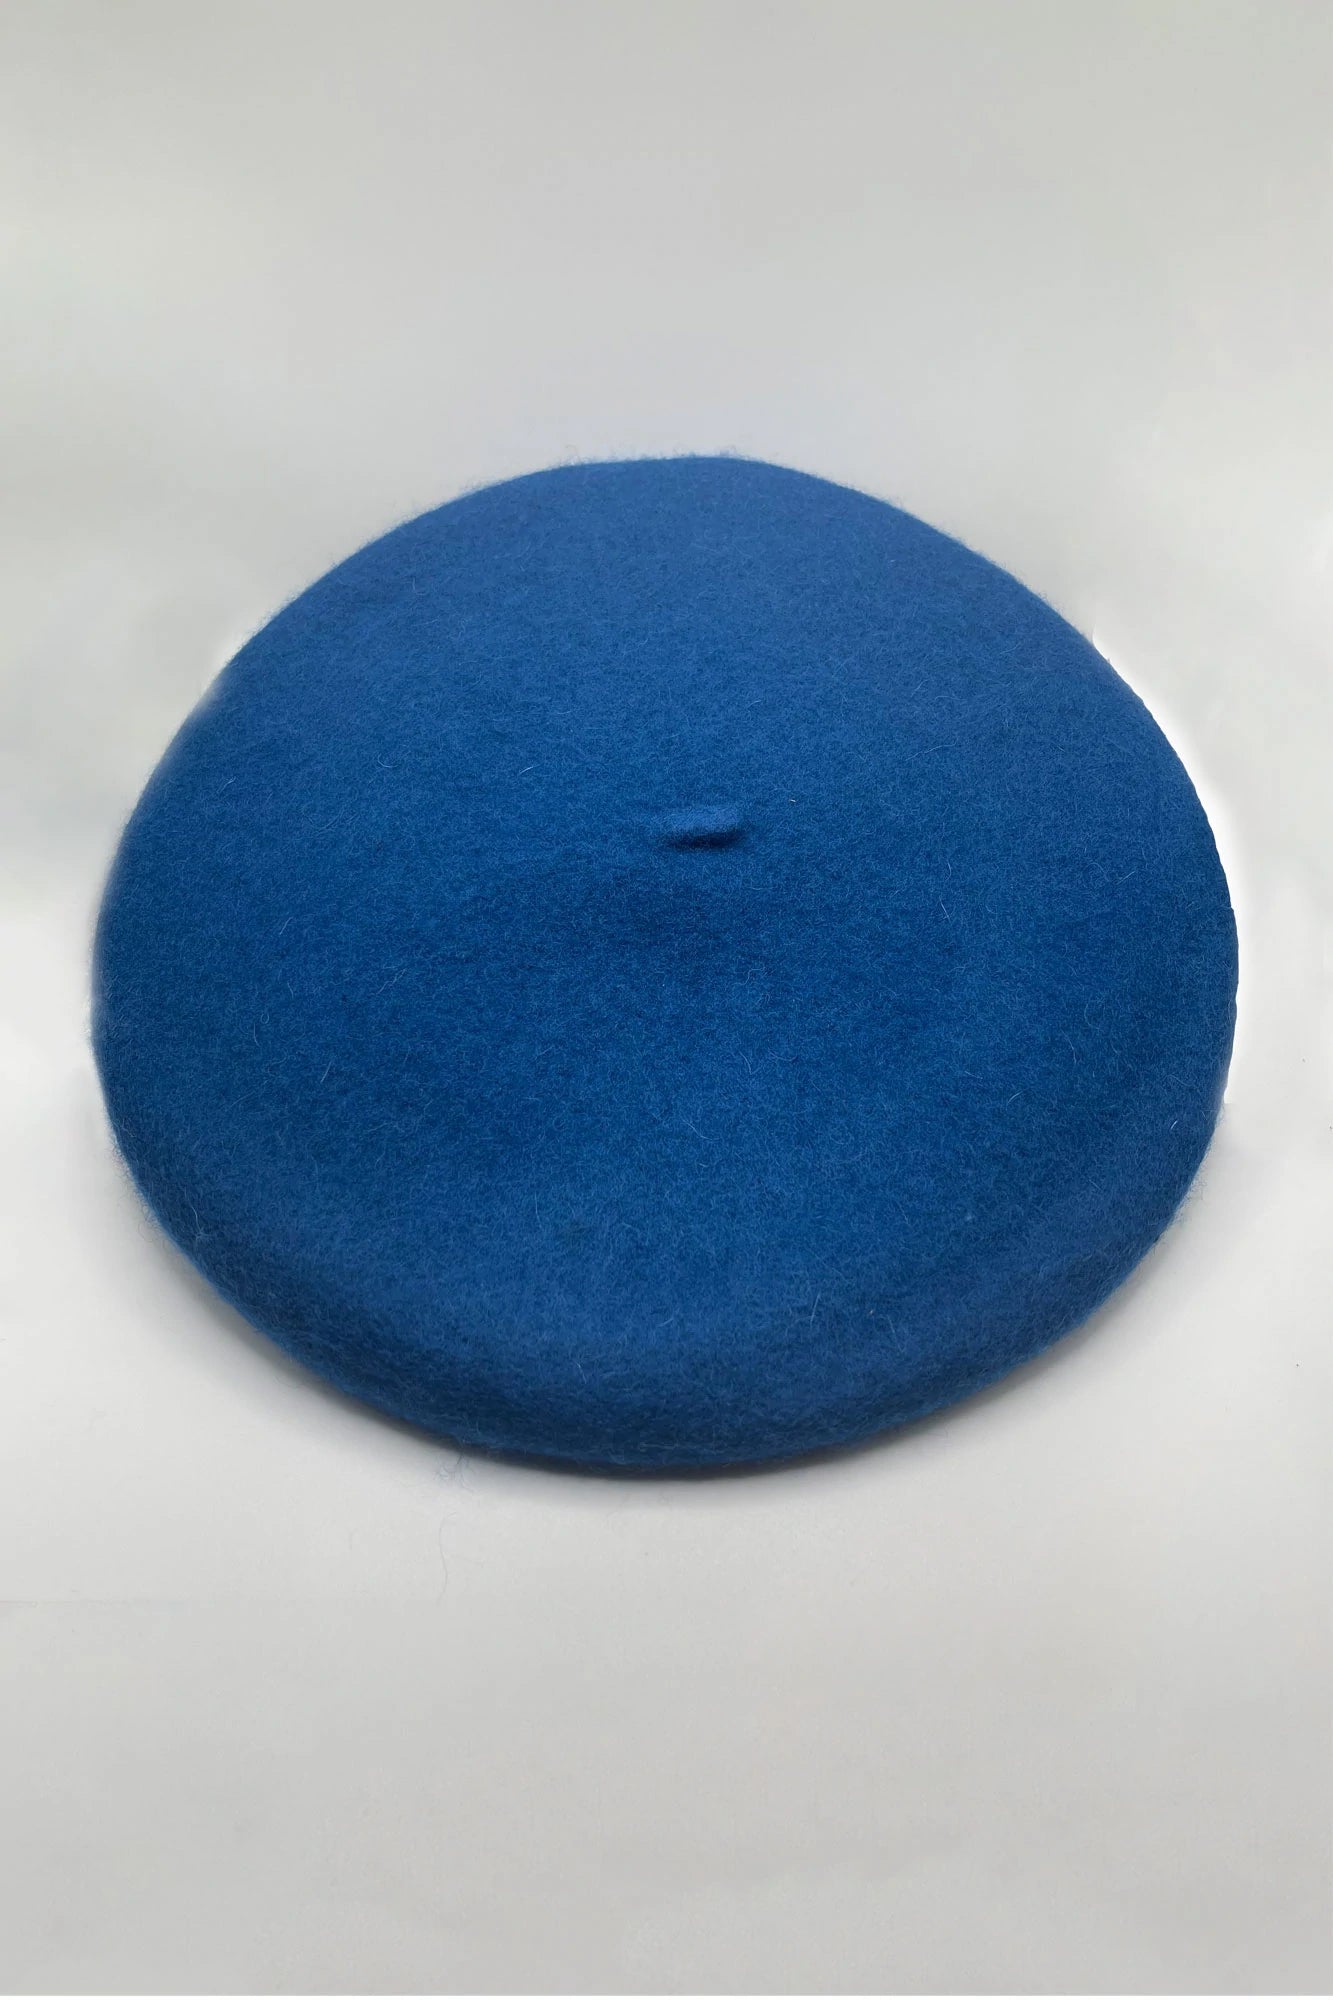 Beret in Gothic Blue